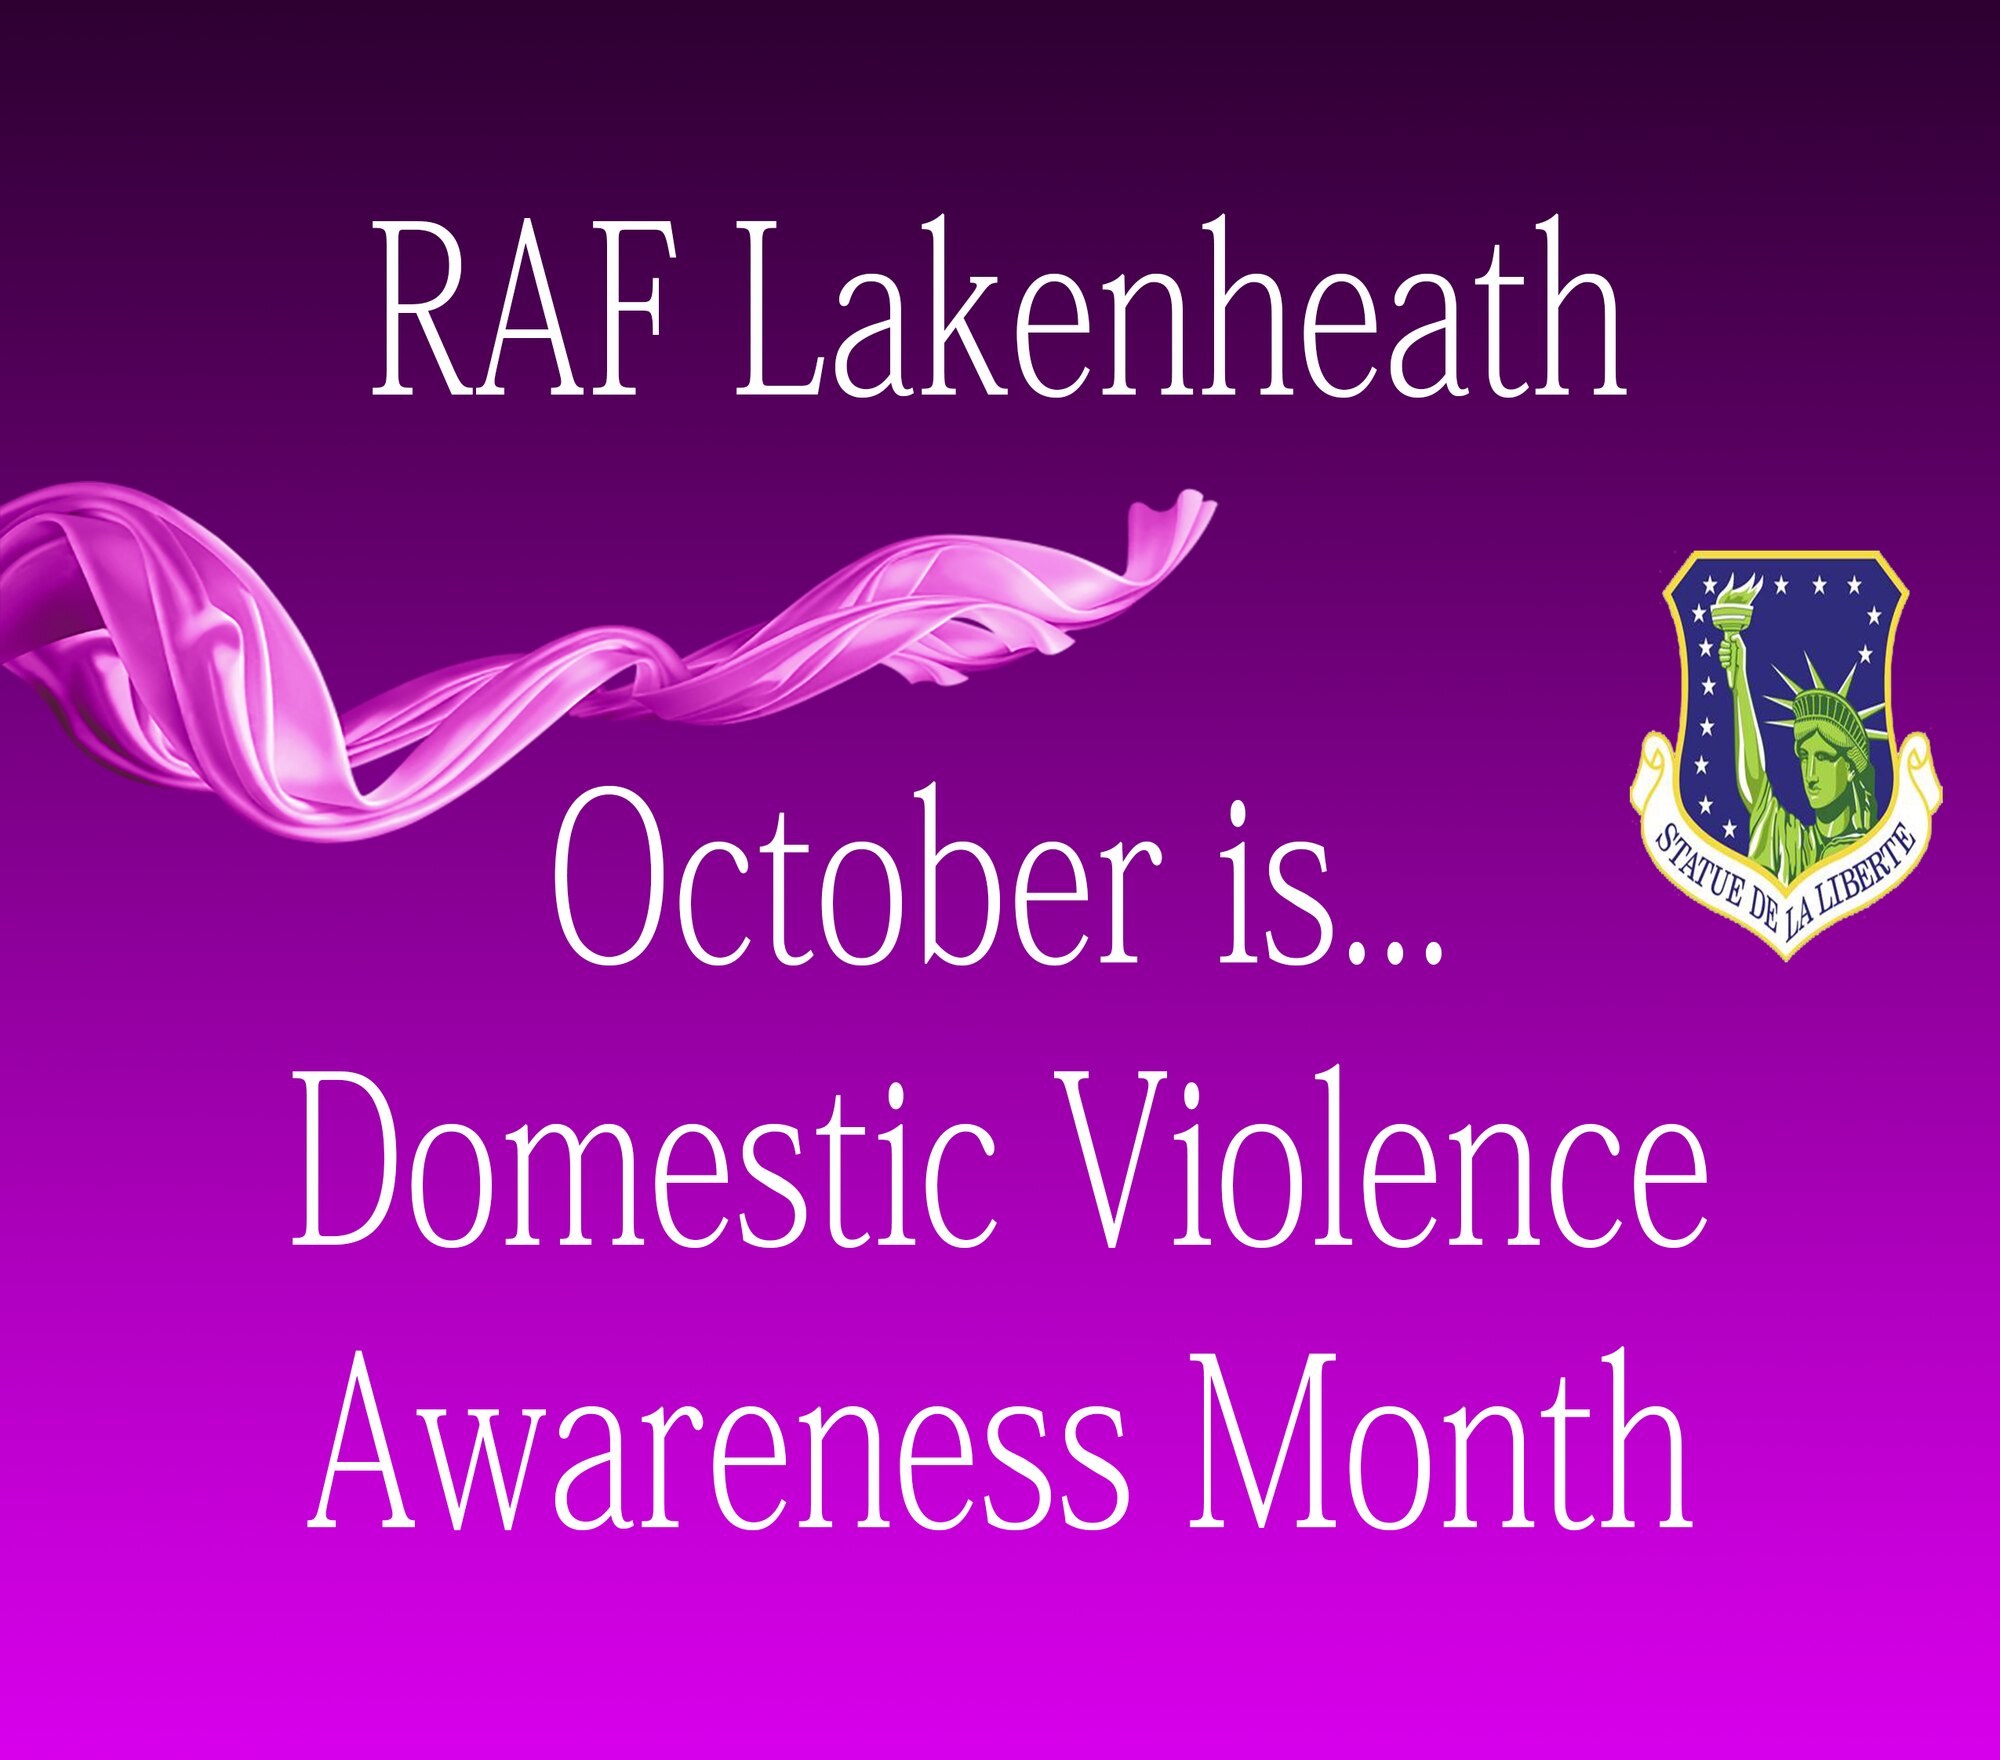 Domestic Violence Awareness Month will be observed throughout October 2018 at Royal Air Force Lakenheath and RAF Mildenhall, England. Several educational events are scheduled for Liberty Airmen and their families to help raise awareness on domestic violence issues. (U.S. Air Force graphic by Airman 1st Class Gaspar Cortez)